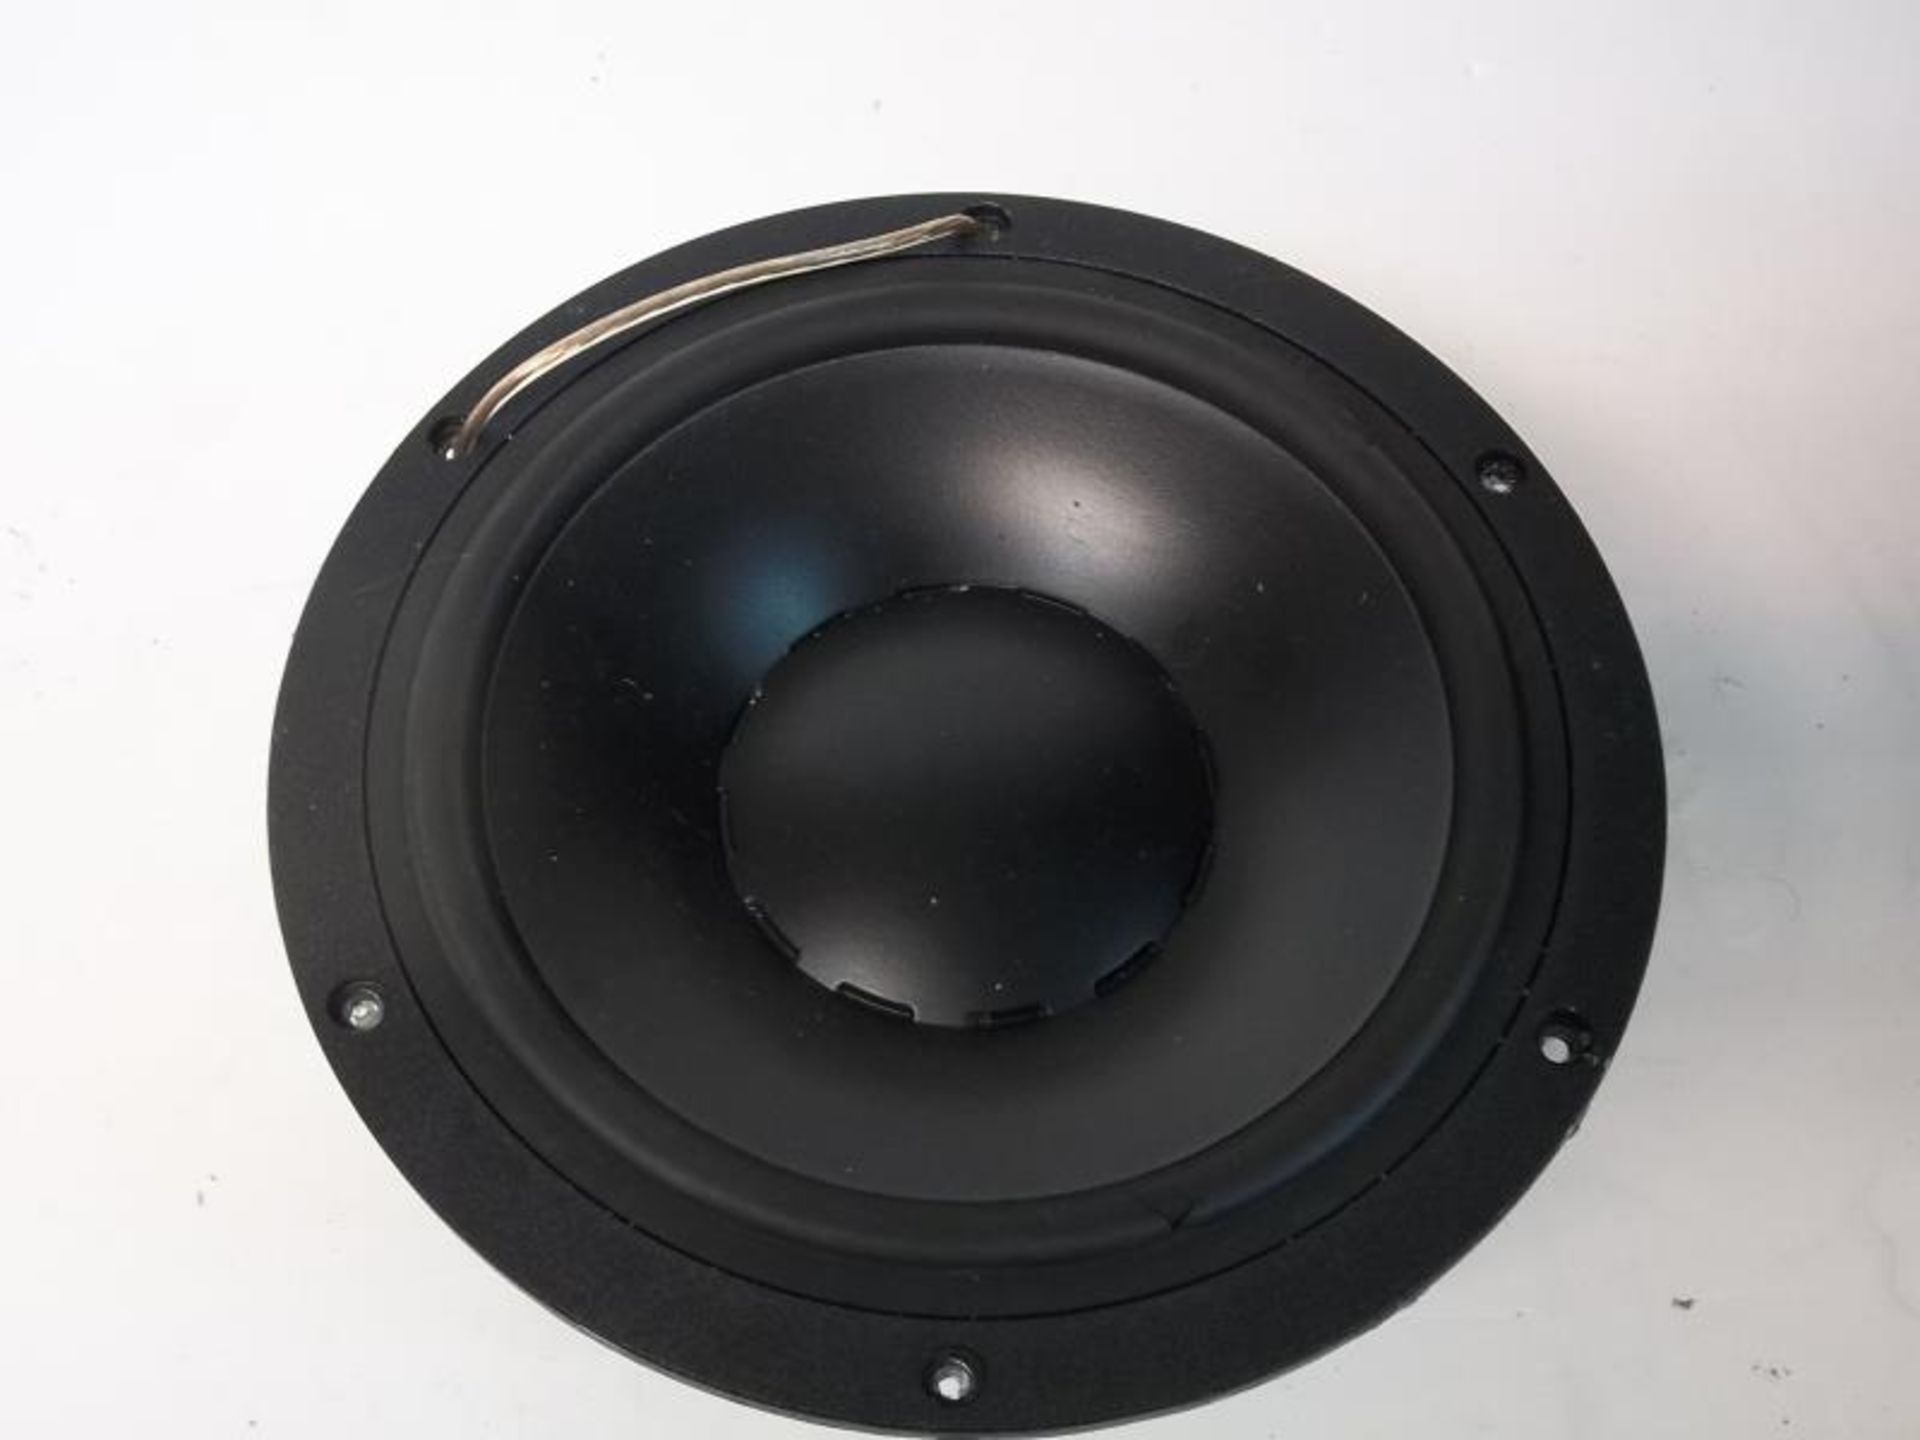 Pr of Dynaudio speakers, made in Denmark, 6" 20W75, no 85720, cones are dirty - Image 2 of 5